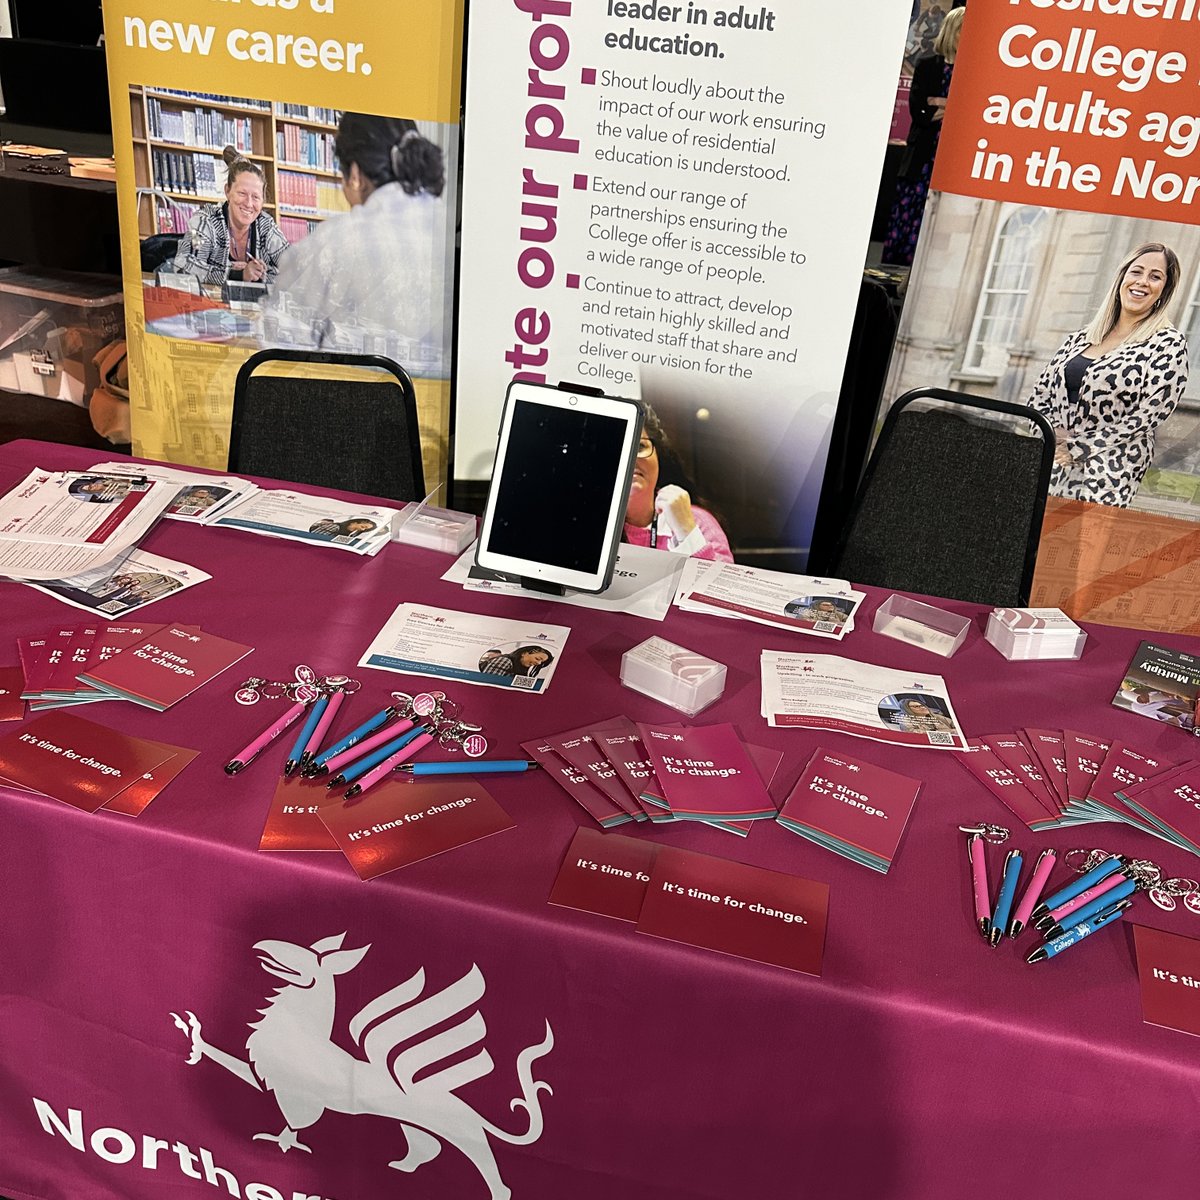 Come and speak to our team at the South Yorkshire Skills Expo today. Find out how we can support you to access funded training opportunities including: SWAPS Free courses for jobs Upskilling your workforce Micro Badging #Skills #Businesses #SouthYorkshire